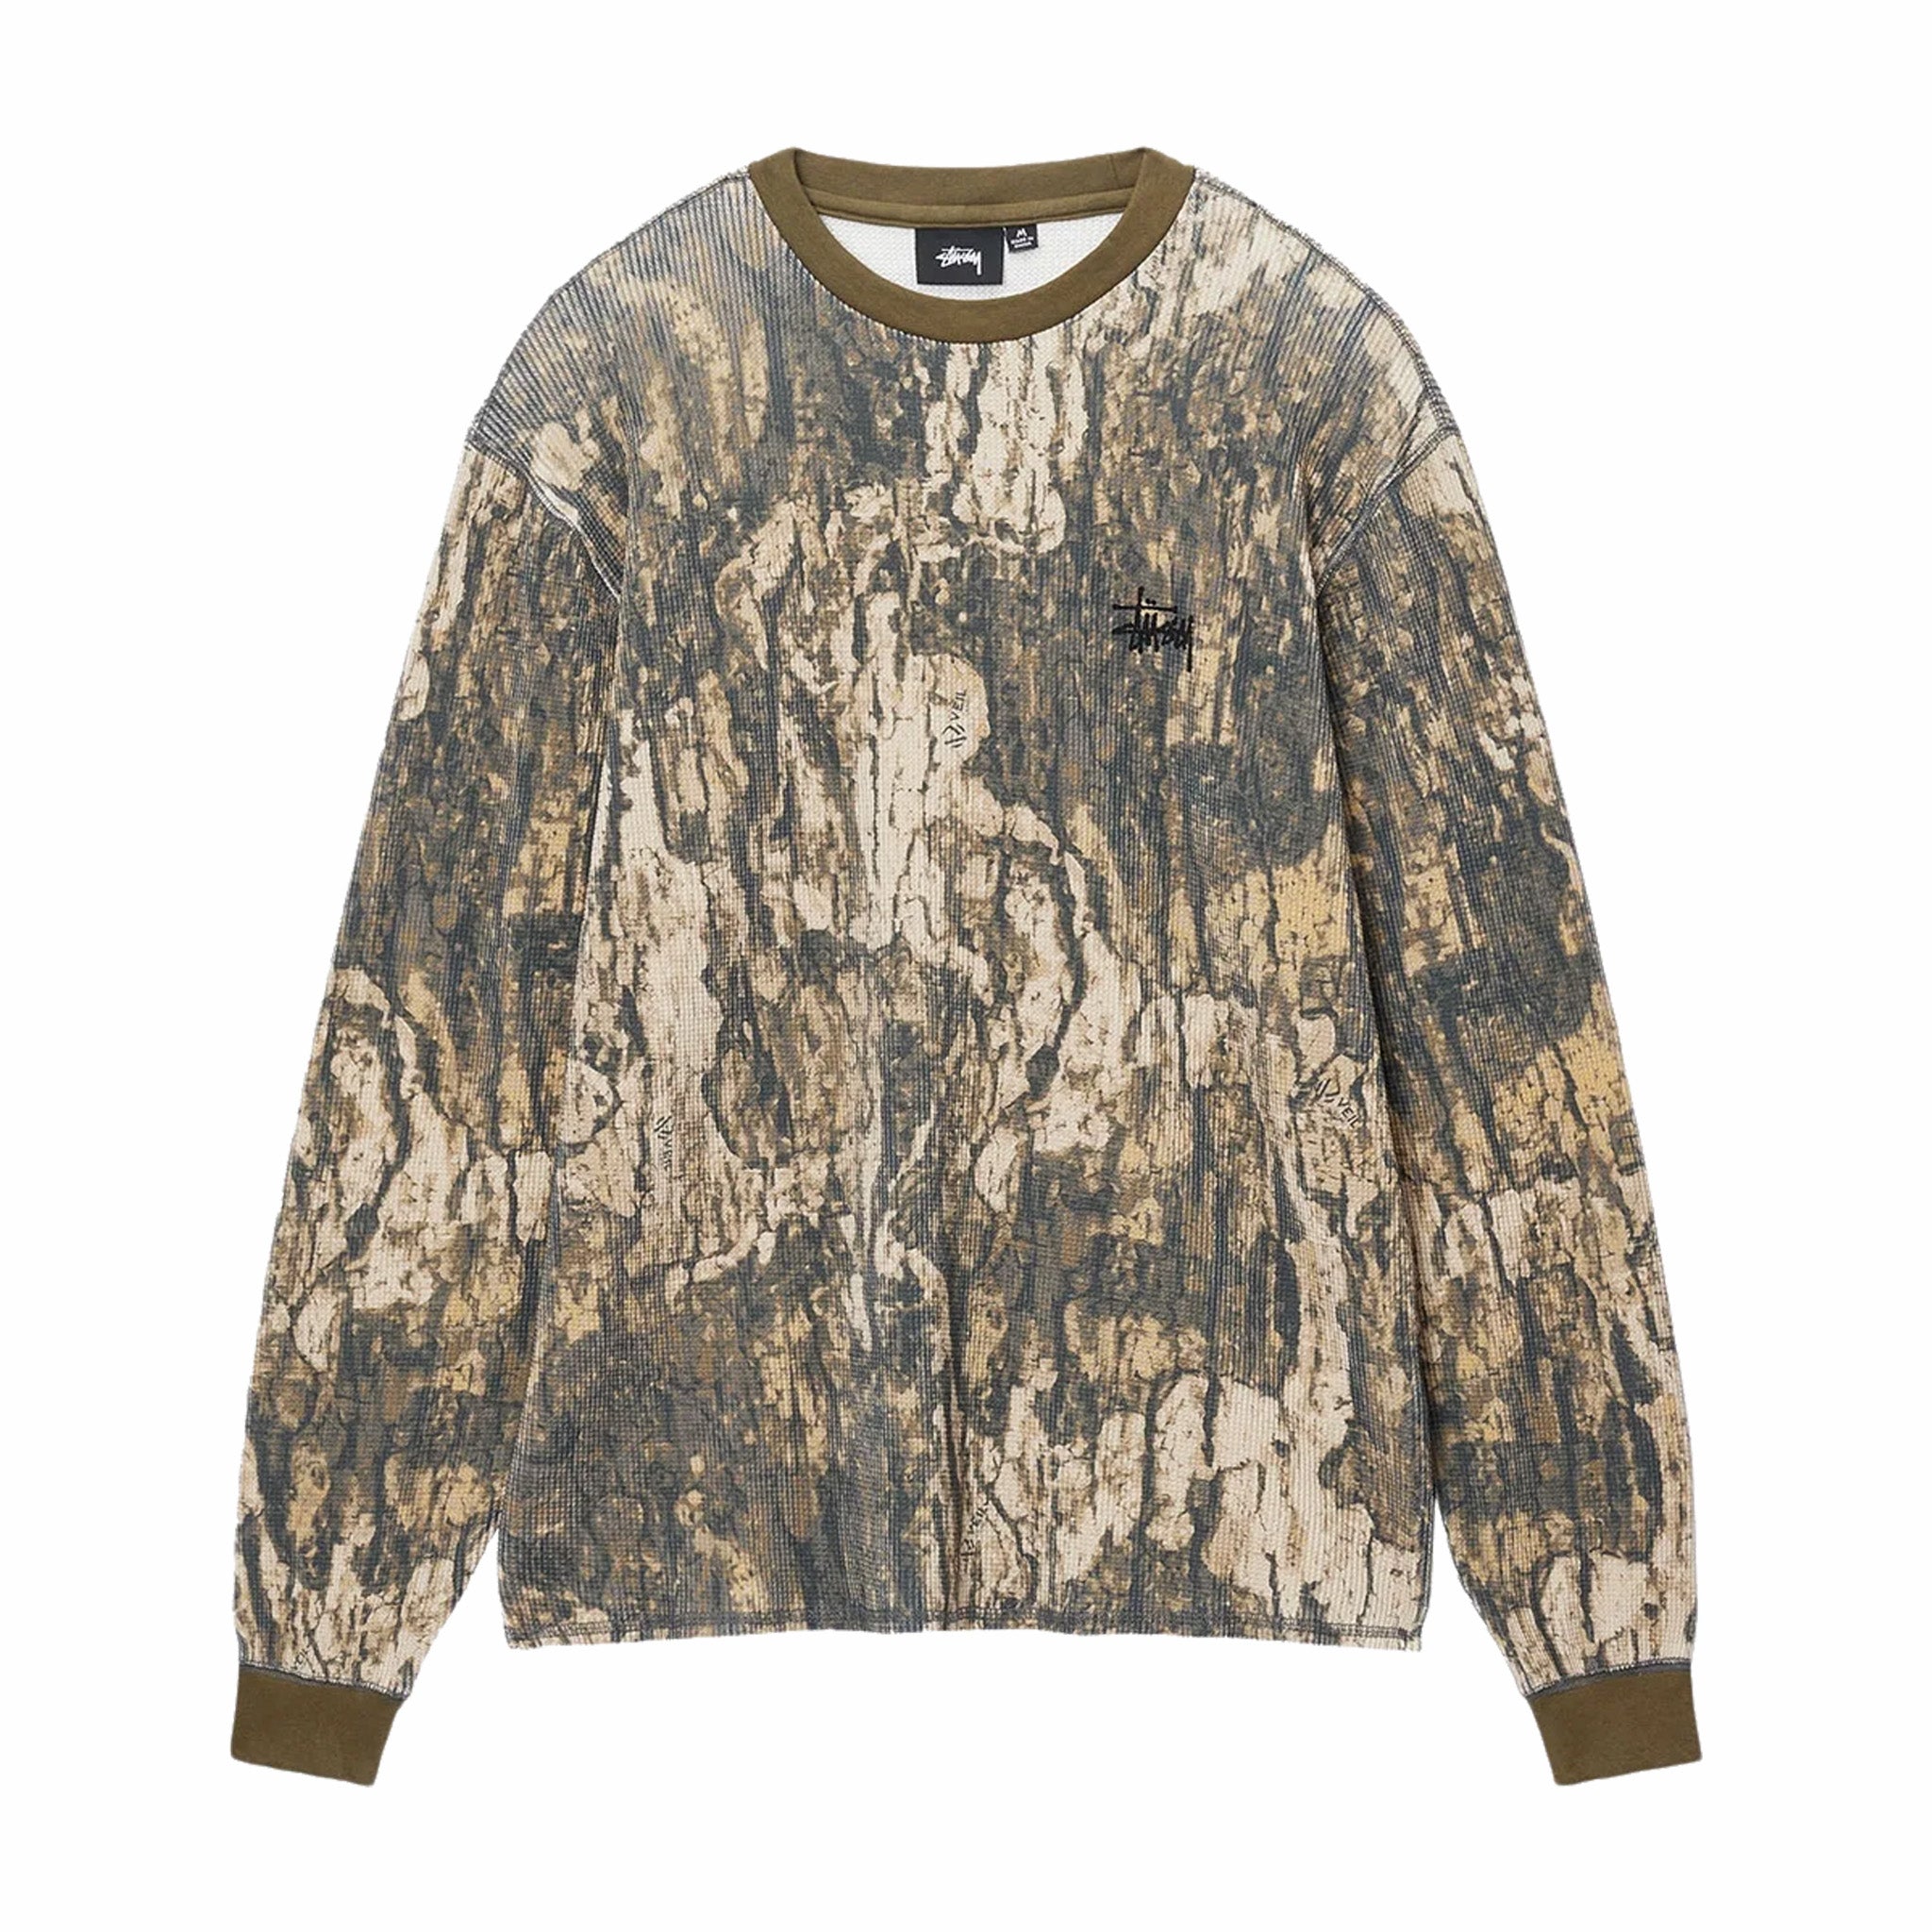 Stüssy Basic Stock LS Thermal (Relic Camo) - August Shop